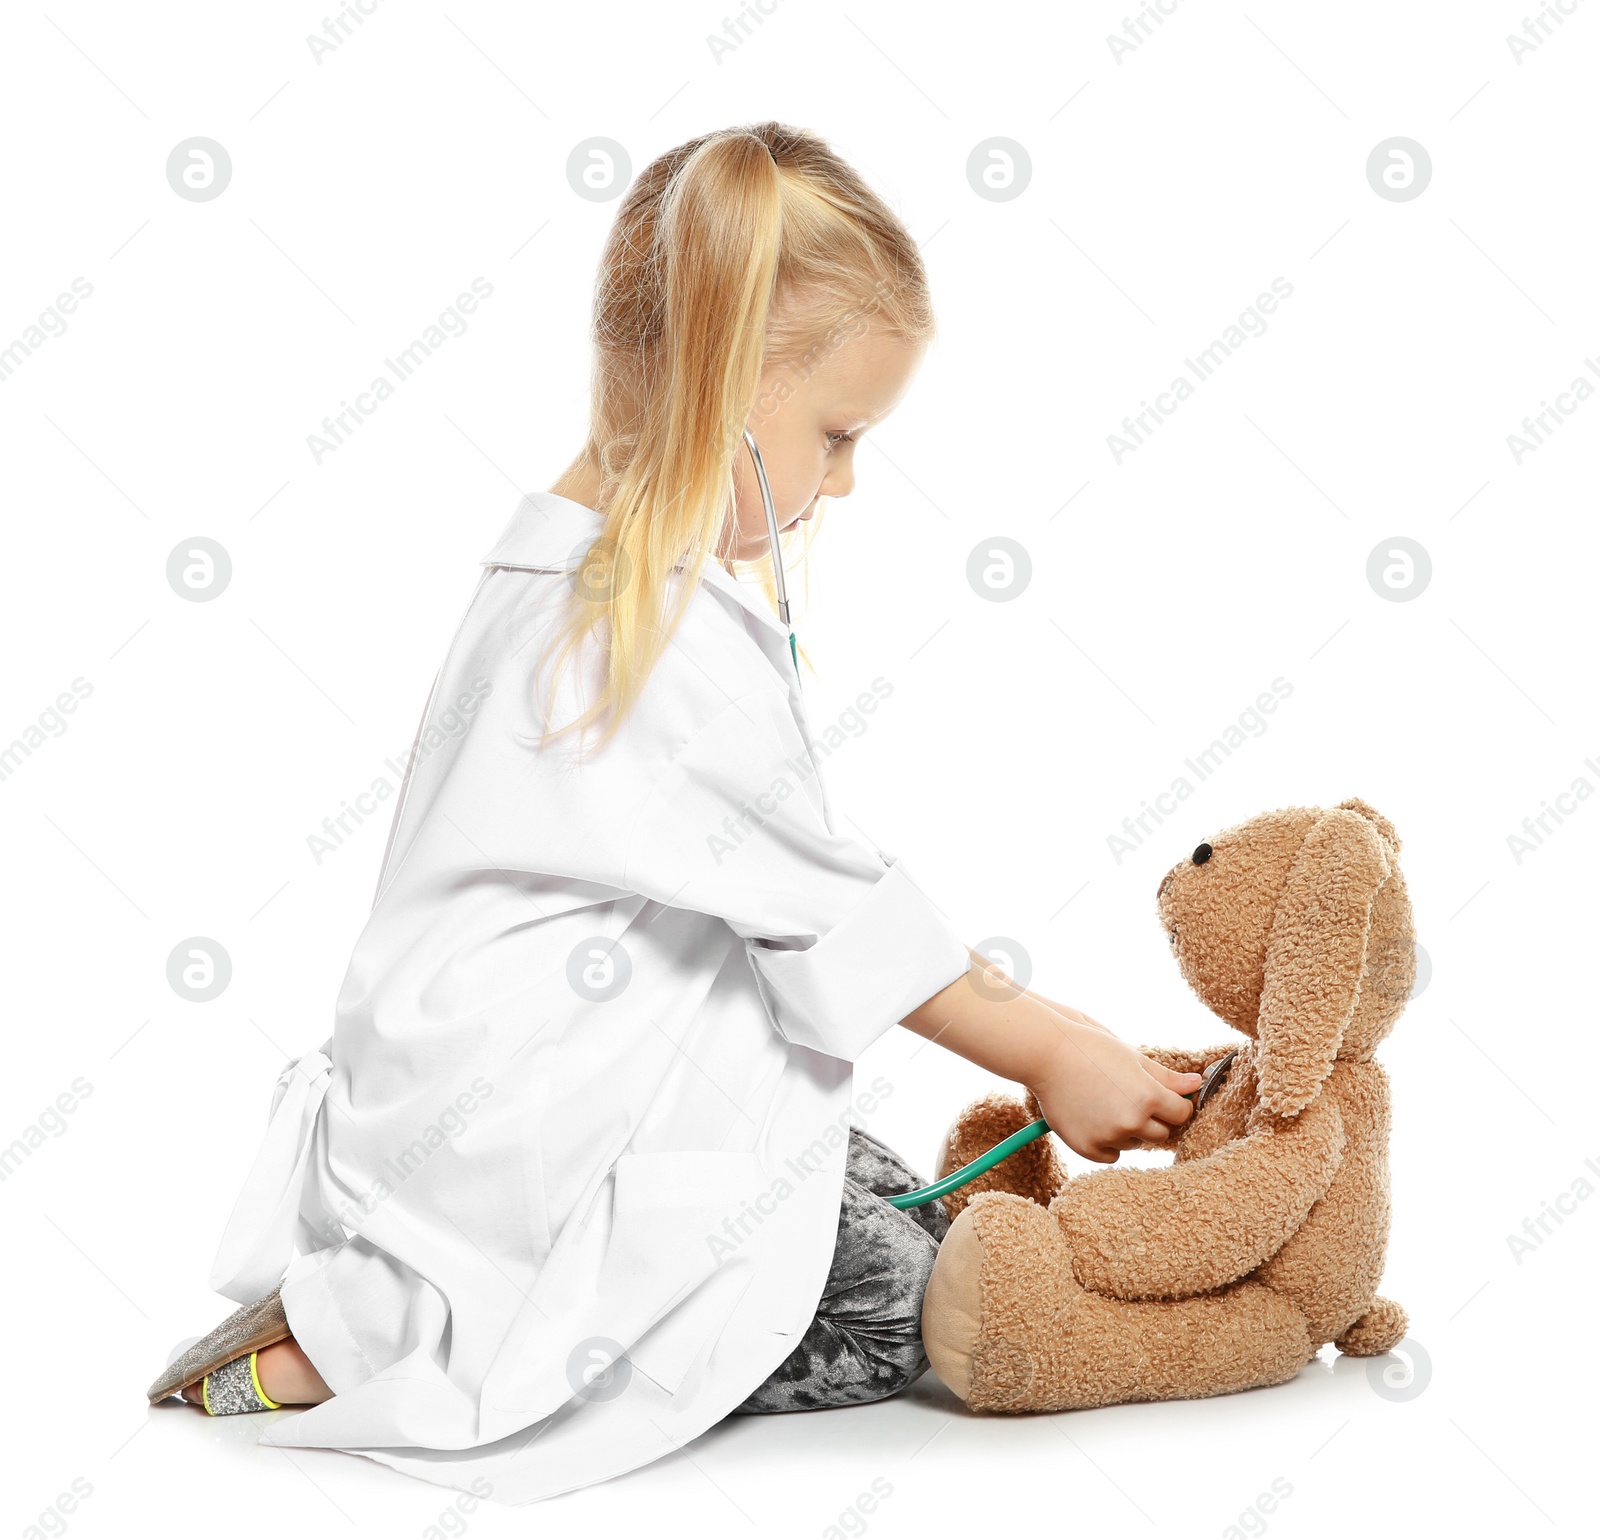 Photo of Cute child imagining herself as doctor while playing with stethoscope and toy bunny on white background